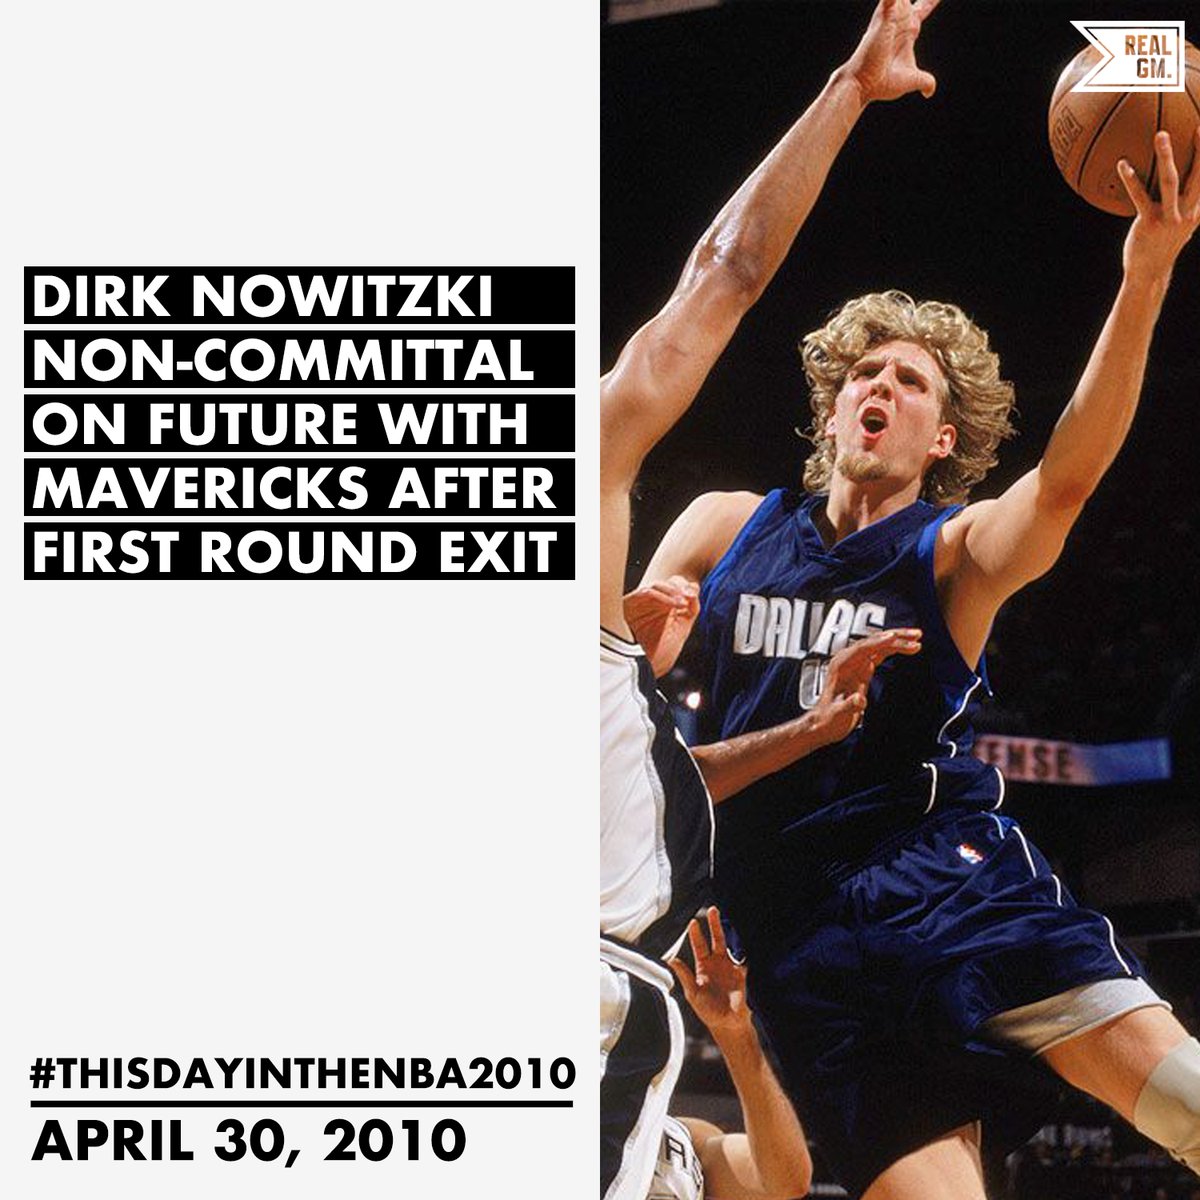  #ThisDayInTheNBA2010April 30, 2010Dirk Nowitzki Non-Committal On Future With Mavericks After First Round Exit https://basketball.realgm.com/wiretap/203611/Dirk-Nowitzki-Non-Committal-On-Future-With-Mavericks-After-First-Round-Exit